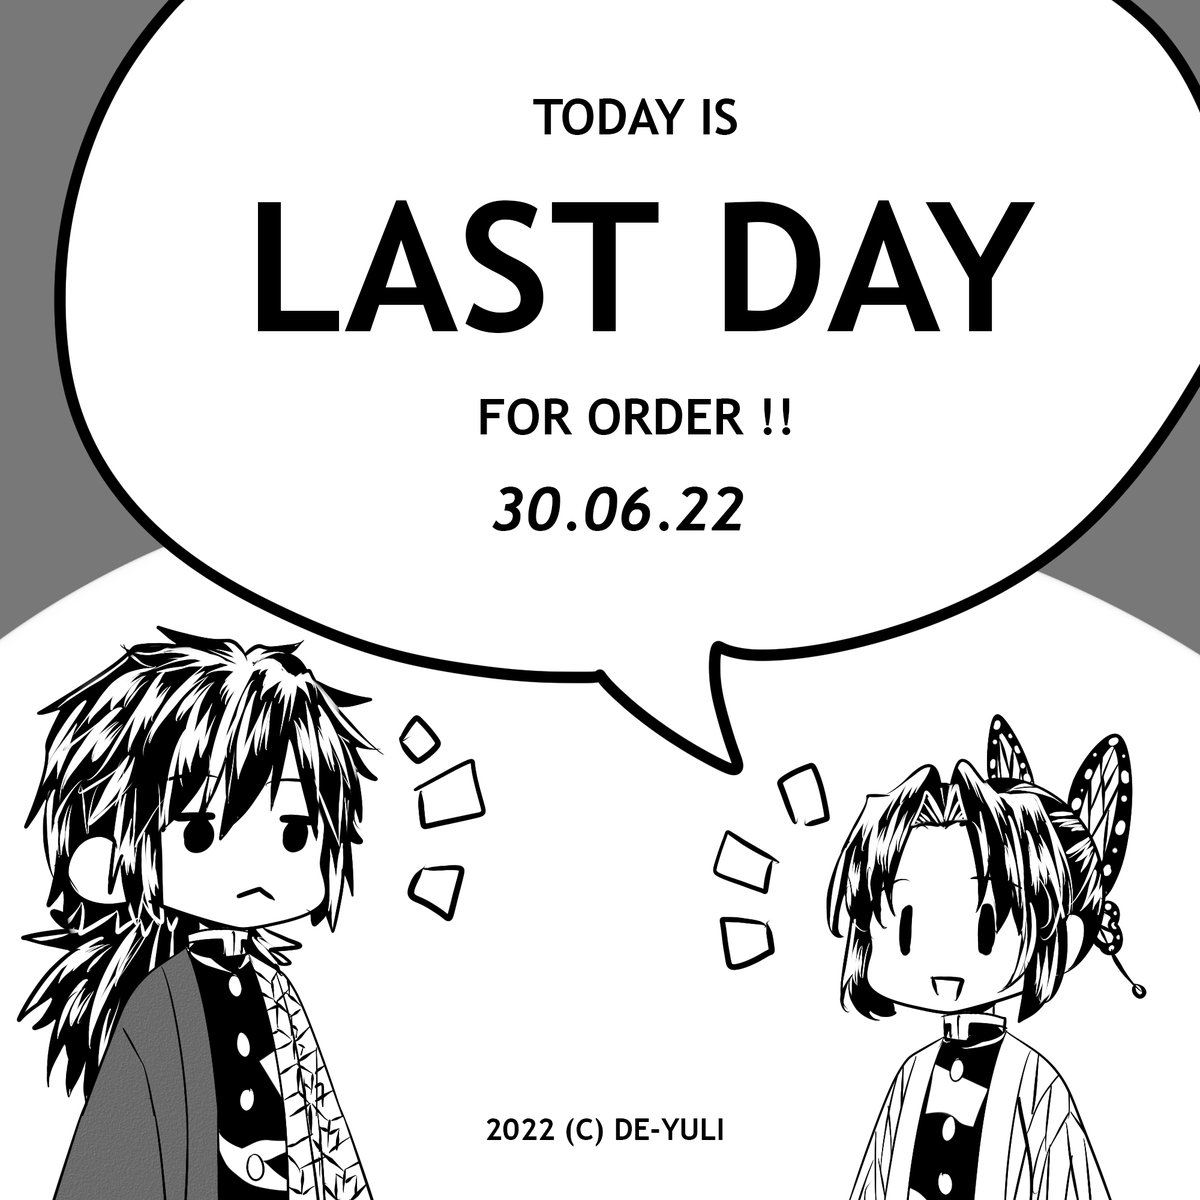 Last day for the shop opens!! After this I will close the shop until next year so grab it fast here!!👌✨
.
Local (Indonesia) and International OK!
🌸 sh0p: https://t.co/9jigmmPiyw
🌸 other sh0p: https://t.co/78Qs8dd54t
🌸 [RT/s are appreciated!] 